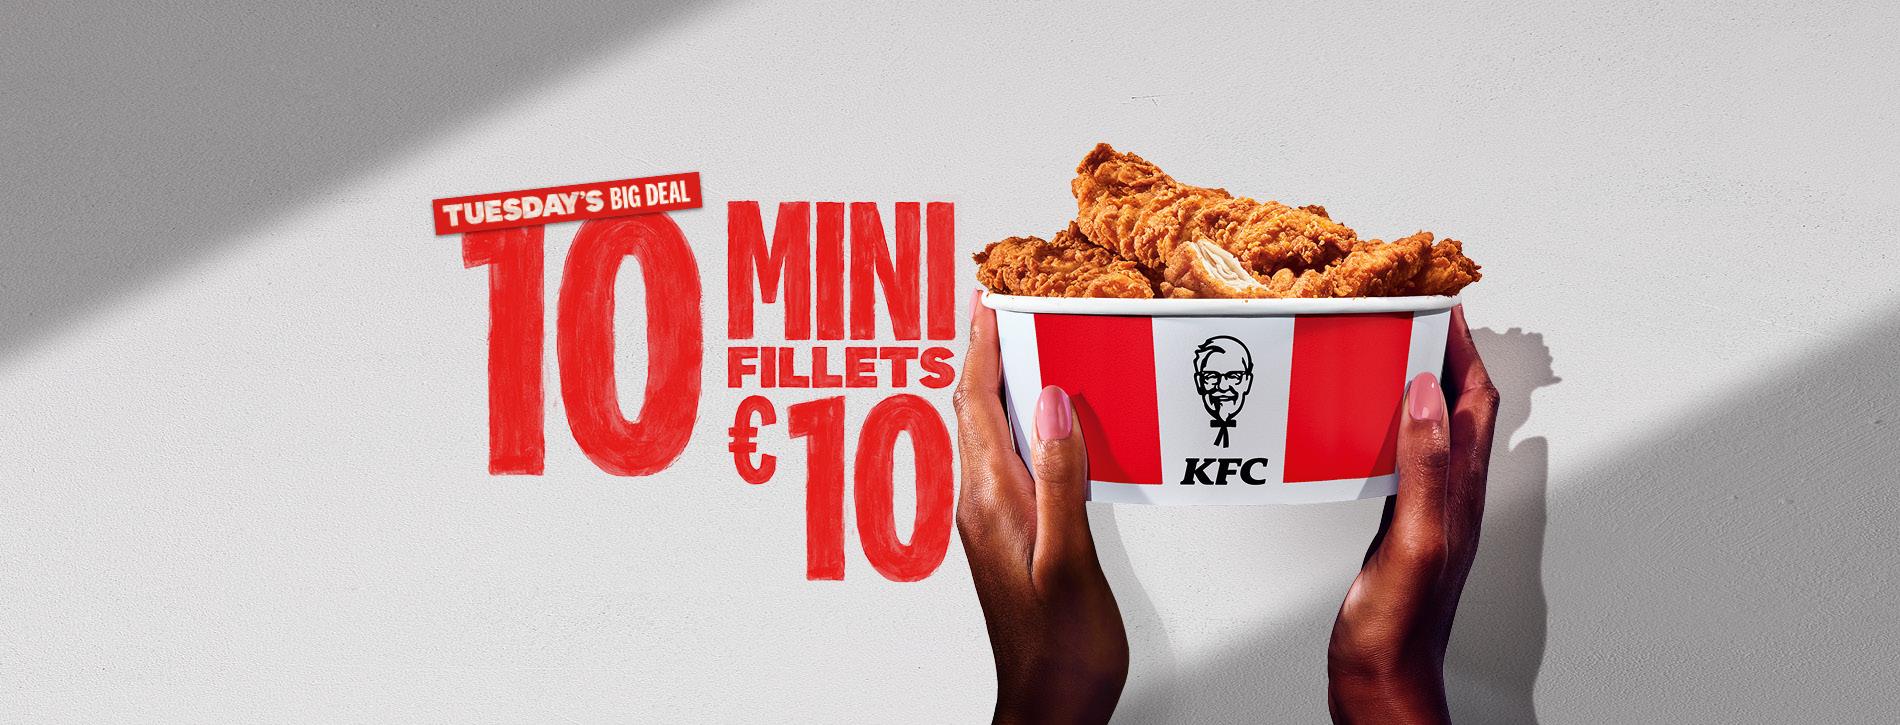 KFC TUESDAY'S BIG DEAL This offer is over for now.